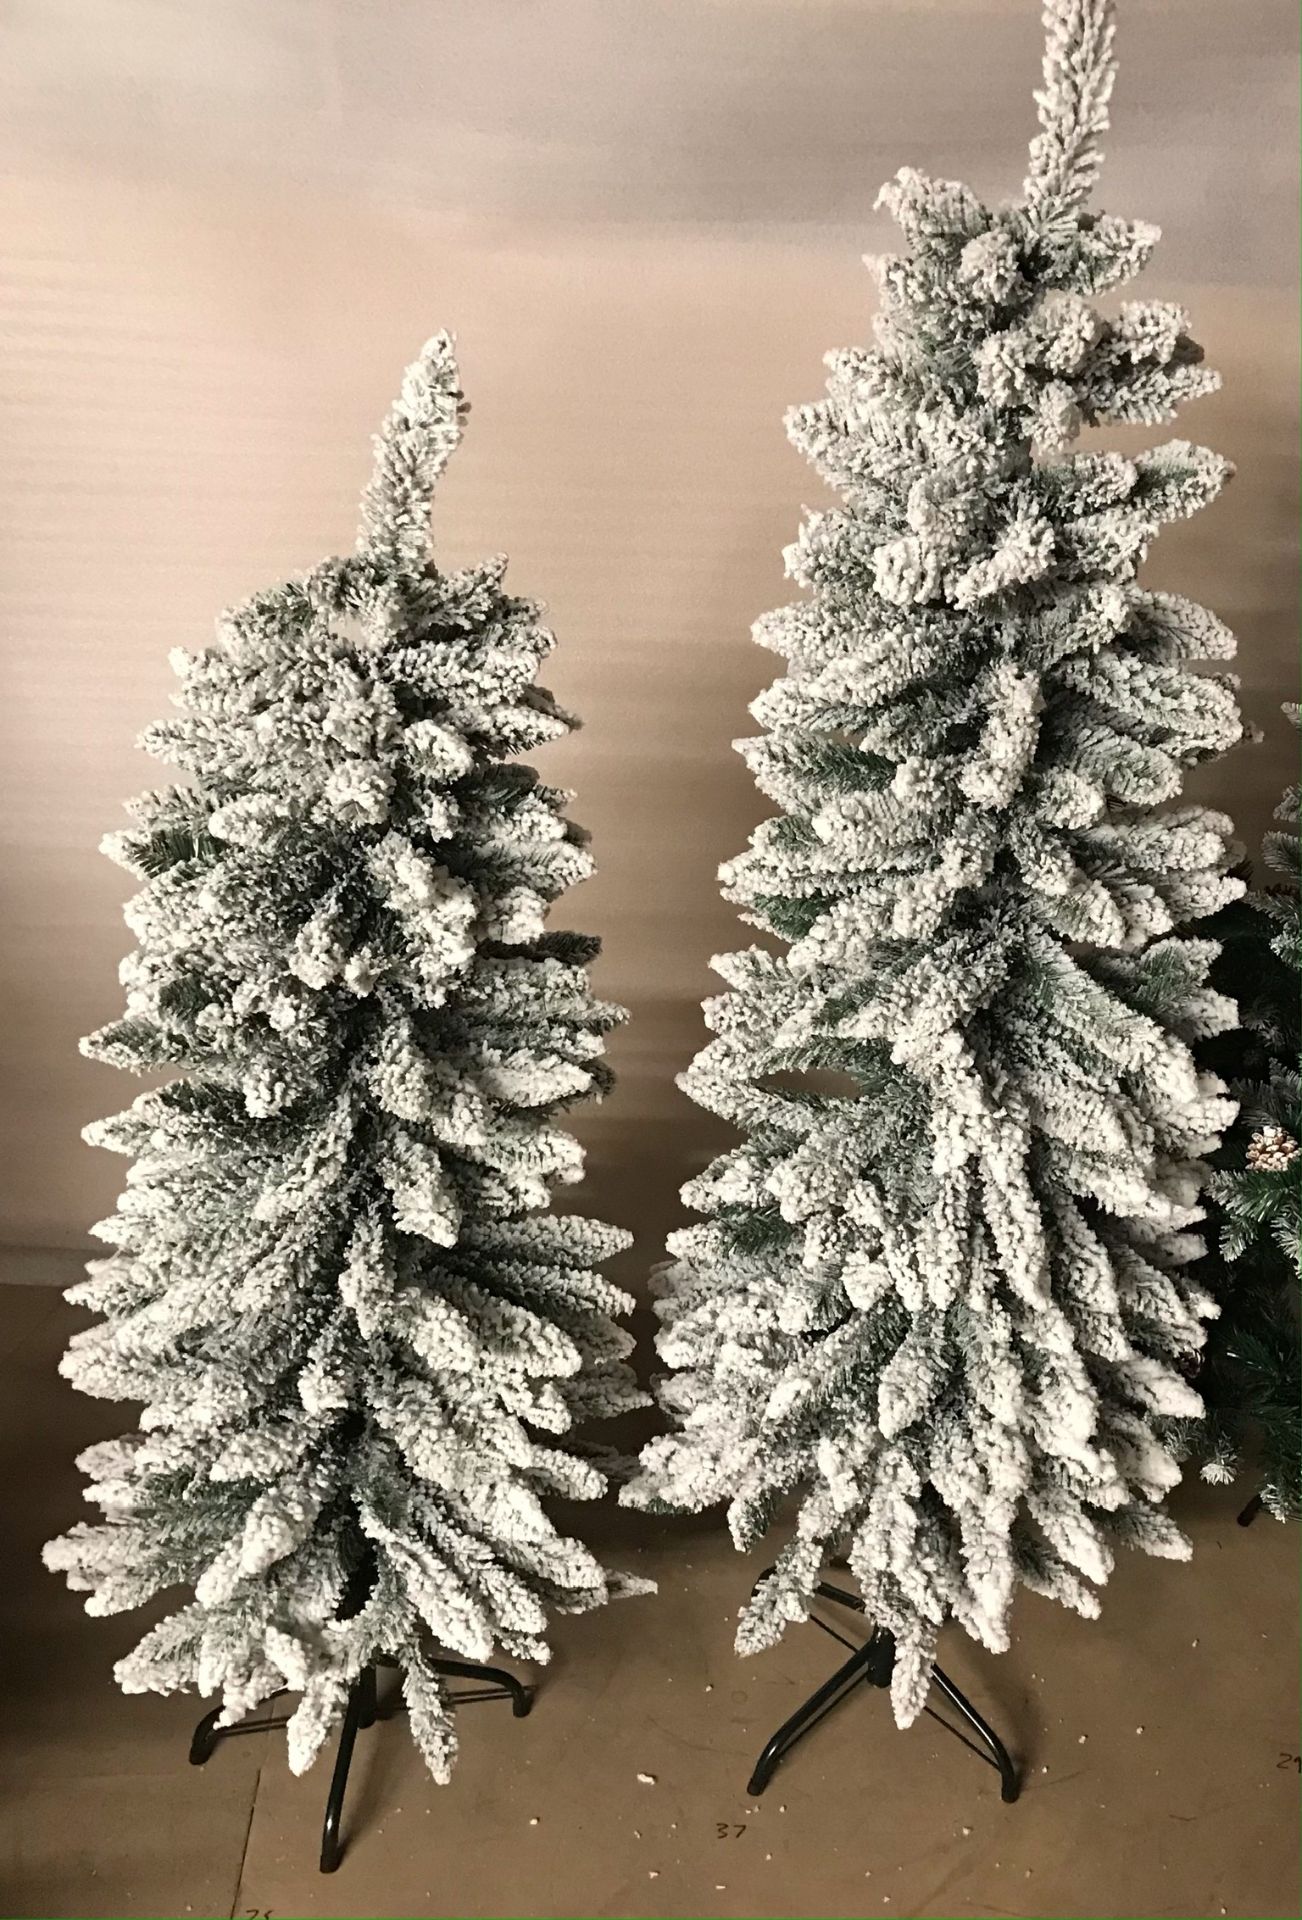 4 x 4ft Christmas Tree Artificial with Snow Frosted Tips Slim Pencil Shape - Image 2 of 2